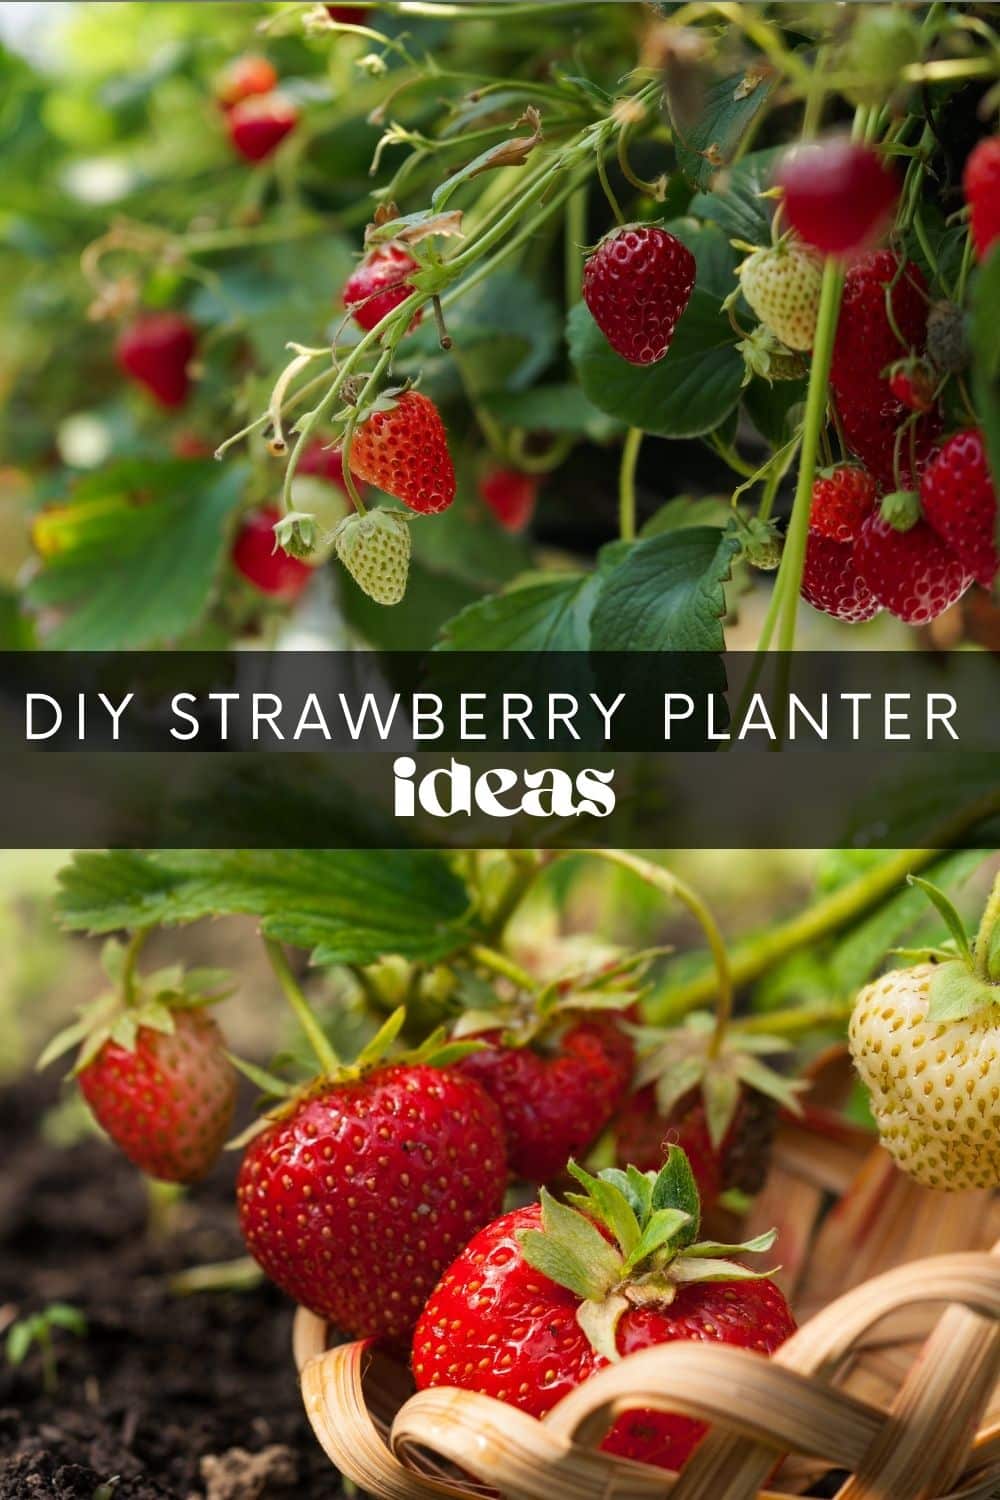 Strawberries are simple to grow and are the perfect addition to any garden! But just as we love to eat them, critters love them too. This means we have to get creative with how we grow them. No matter how big or small your garden is, there are many fun strawberry planter ideas to try.